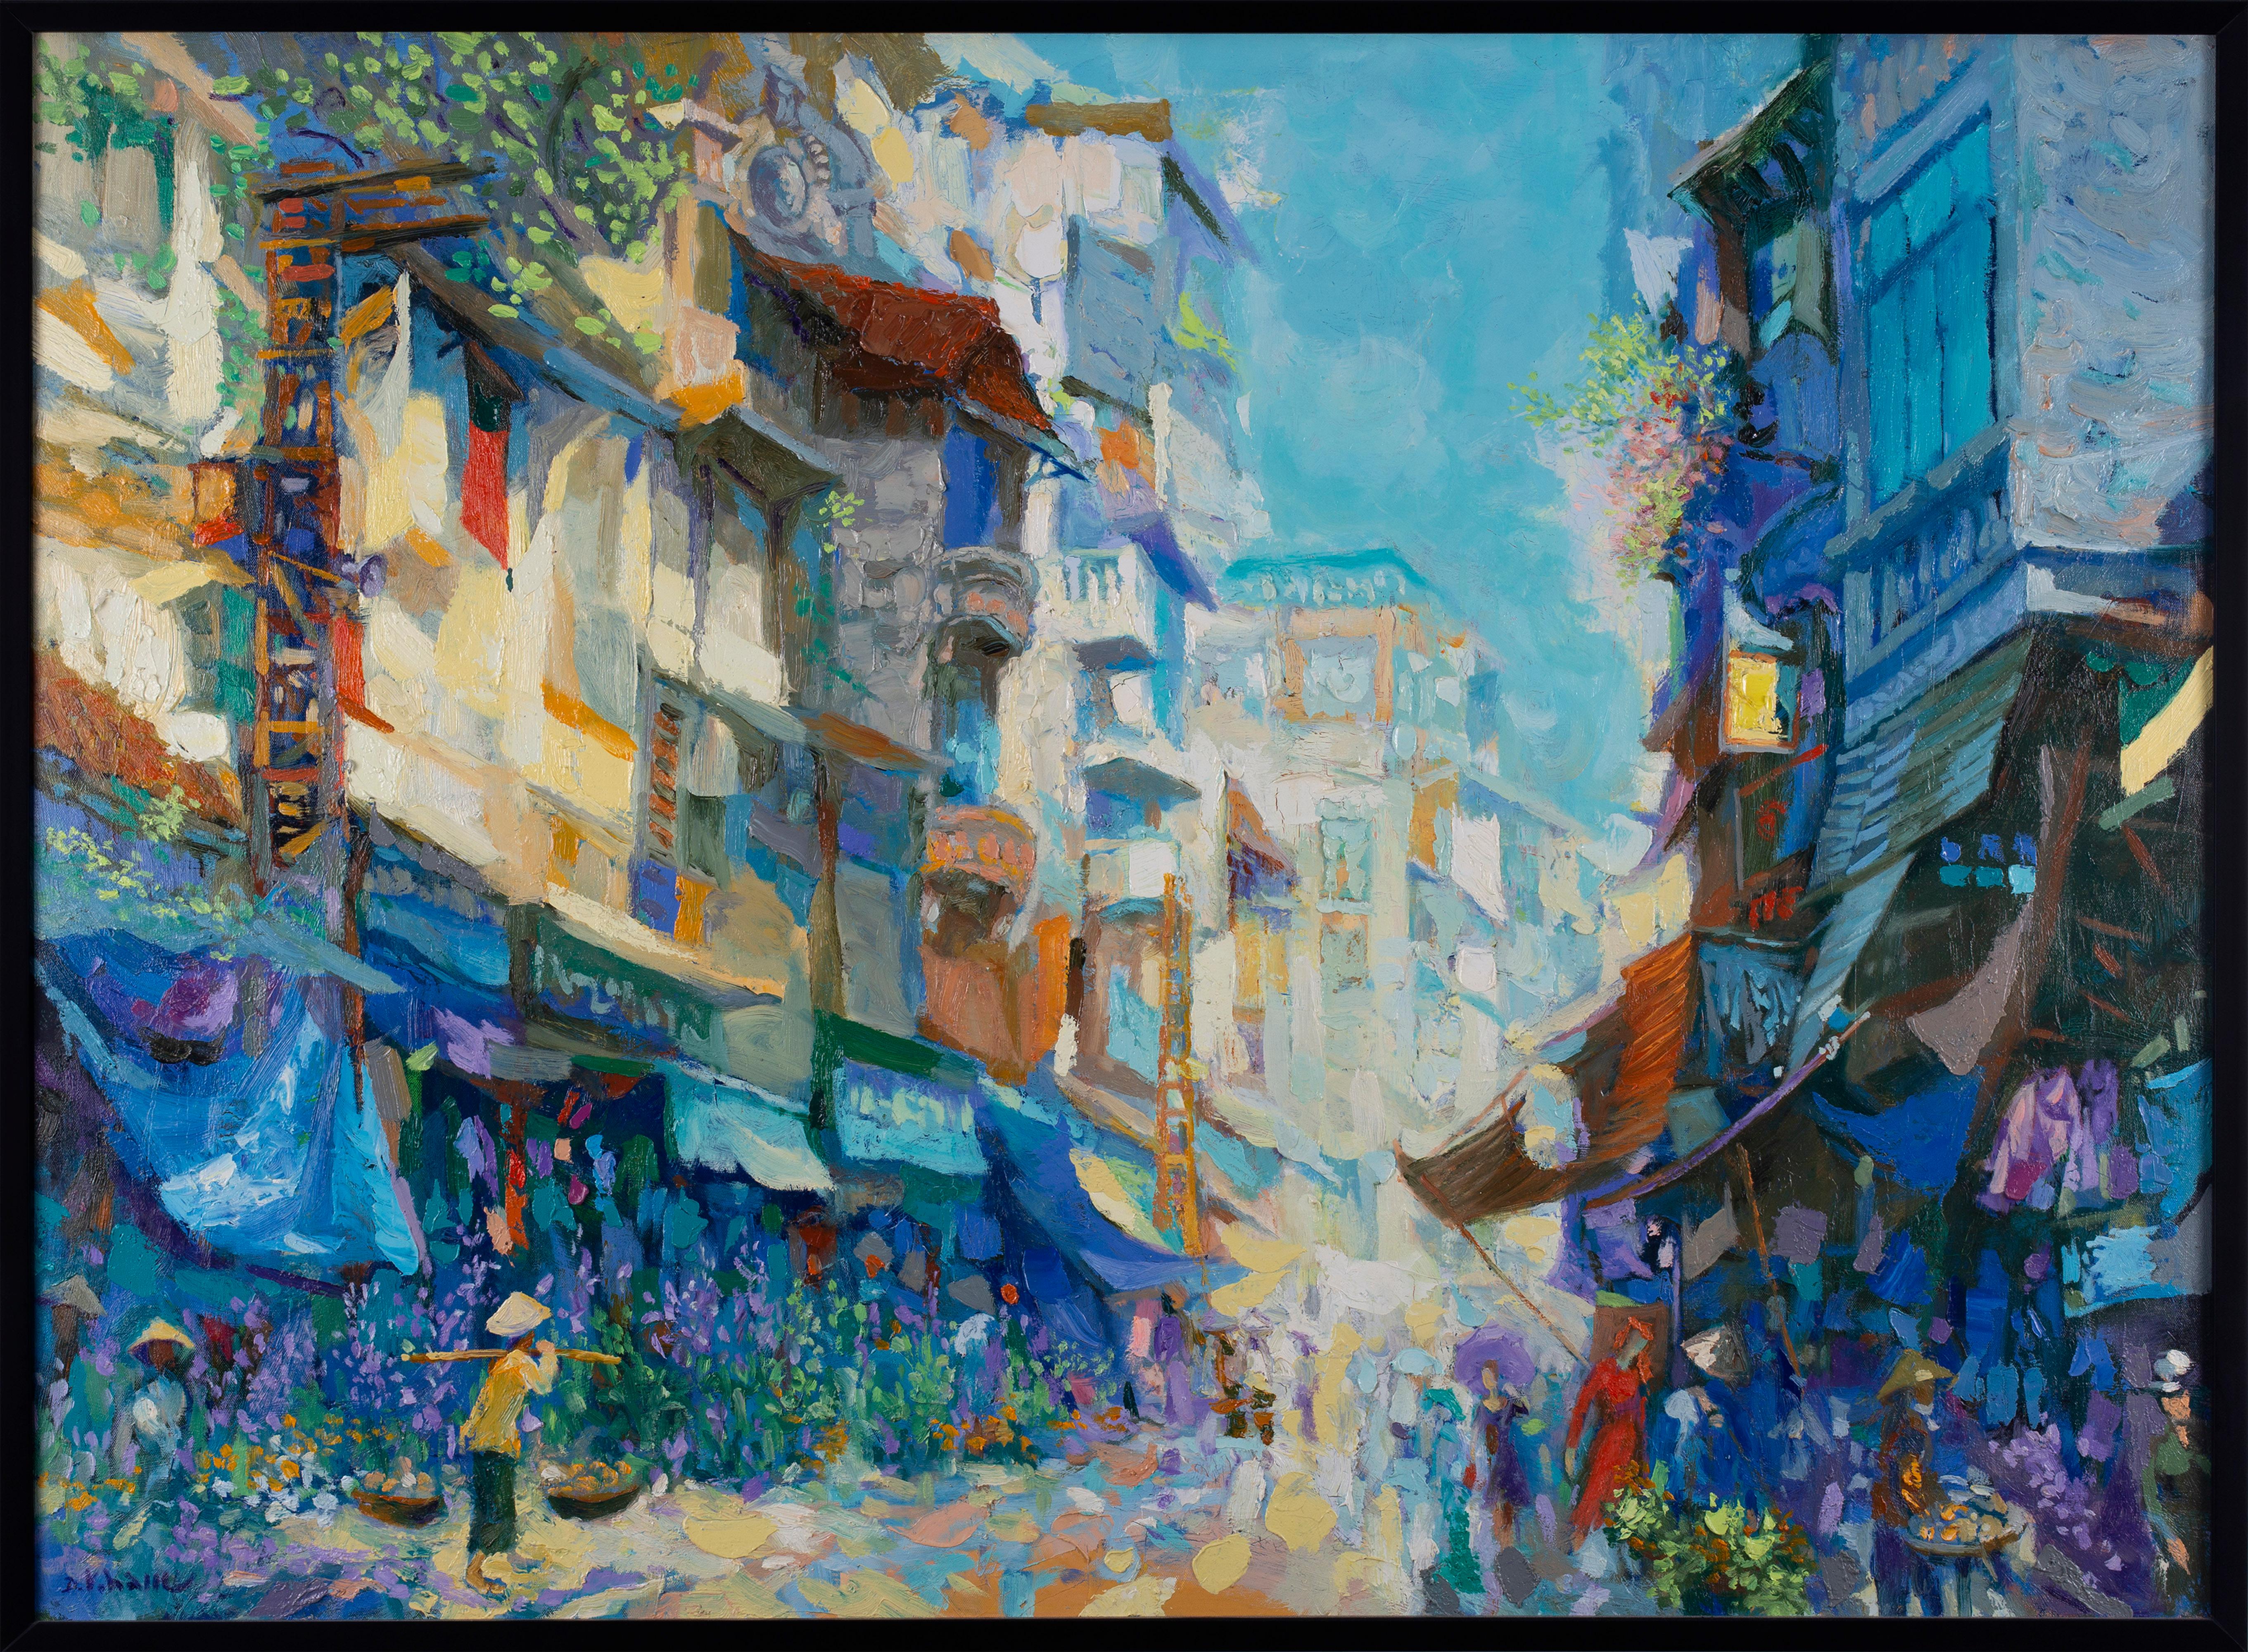 Duong Viet Nam is a Vietnamese contemporary artist known for his Post-Impressionistic style of painting. He often captures city scenes during busy parts of the day.  In his paintings you notice the French architecture which is seen throughout Hanoi.